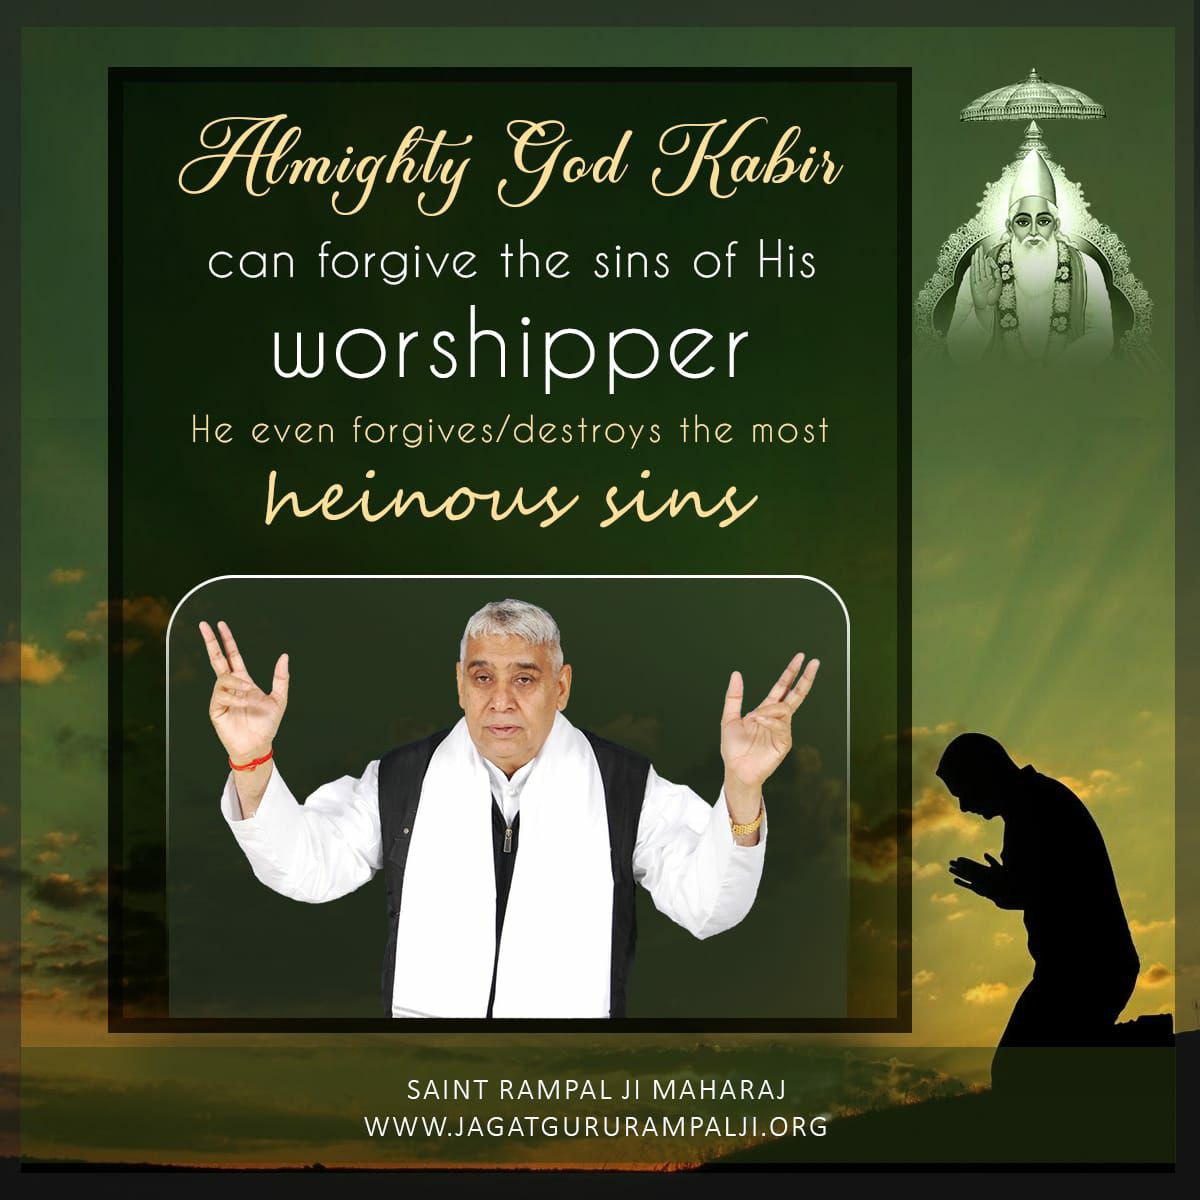 Today's #FridayThoughts
Sant Rampal Ji Maharaj is the only True Guru in this world who guarantees peace, happiness and Salvation.
#GodMorningFriday